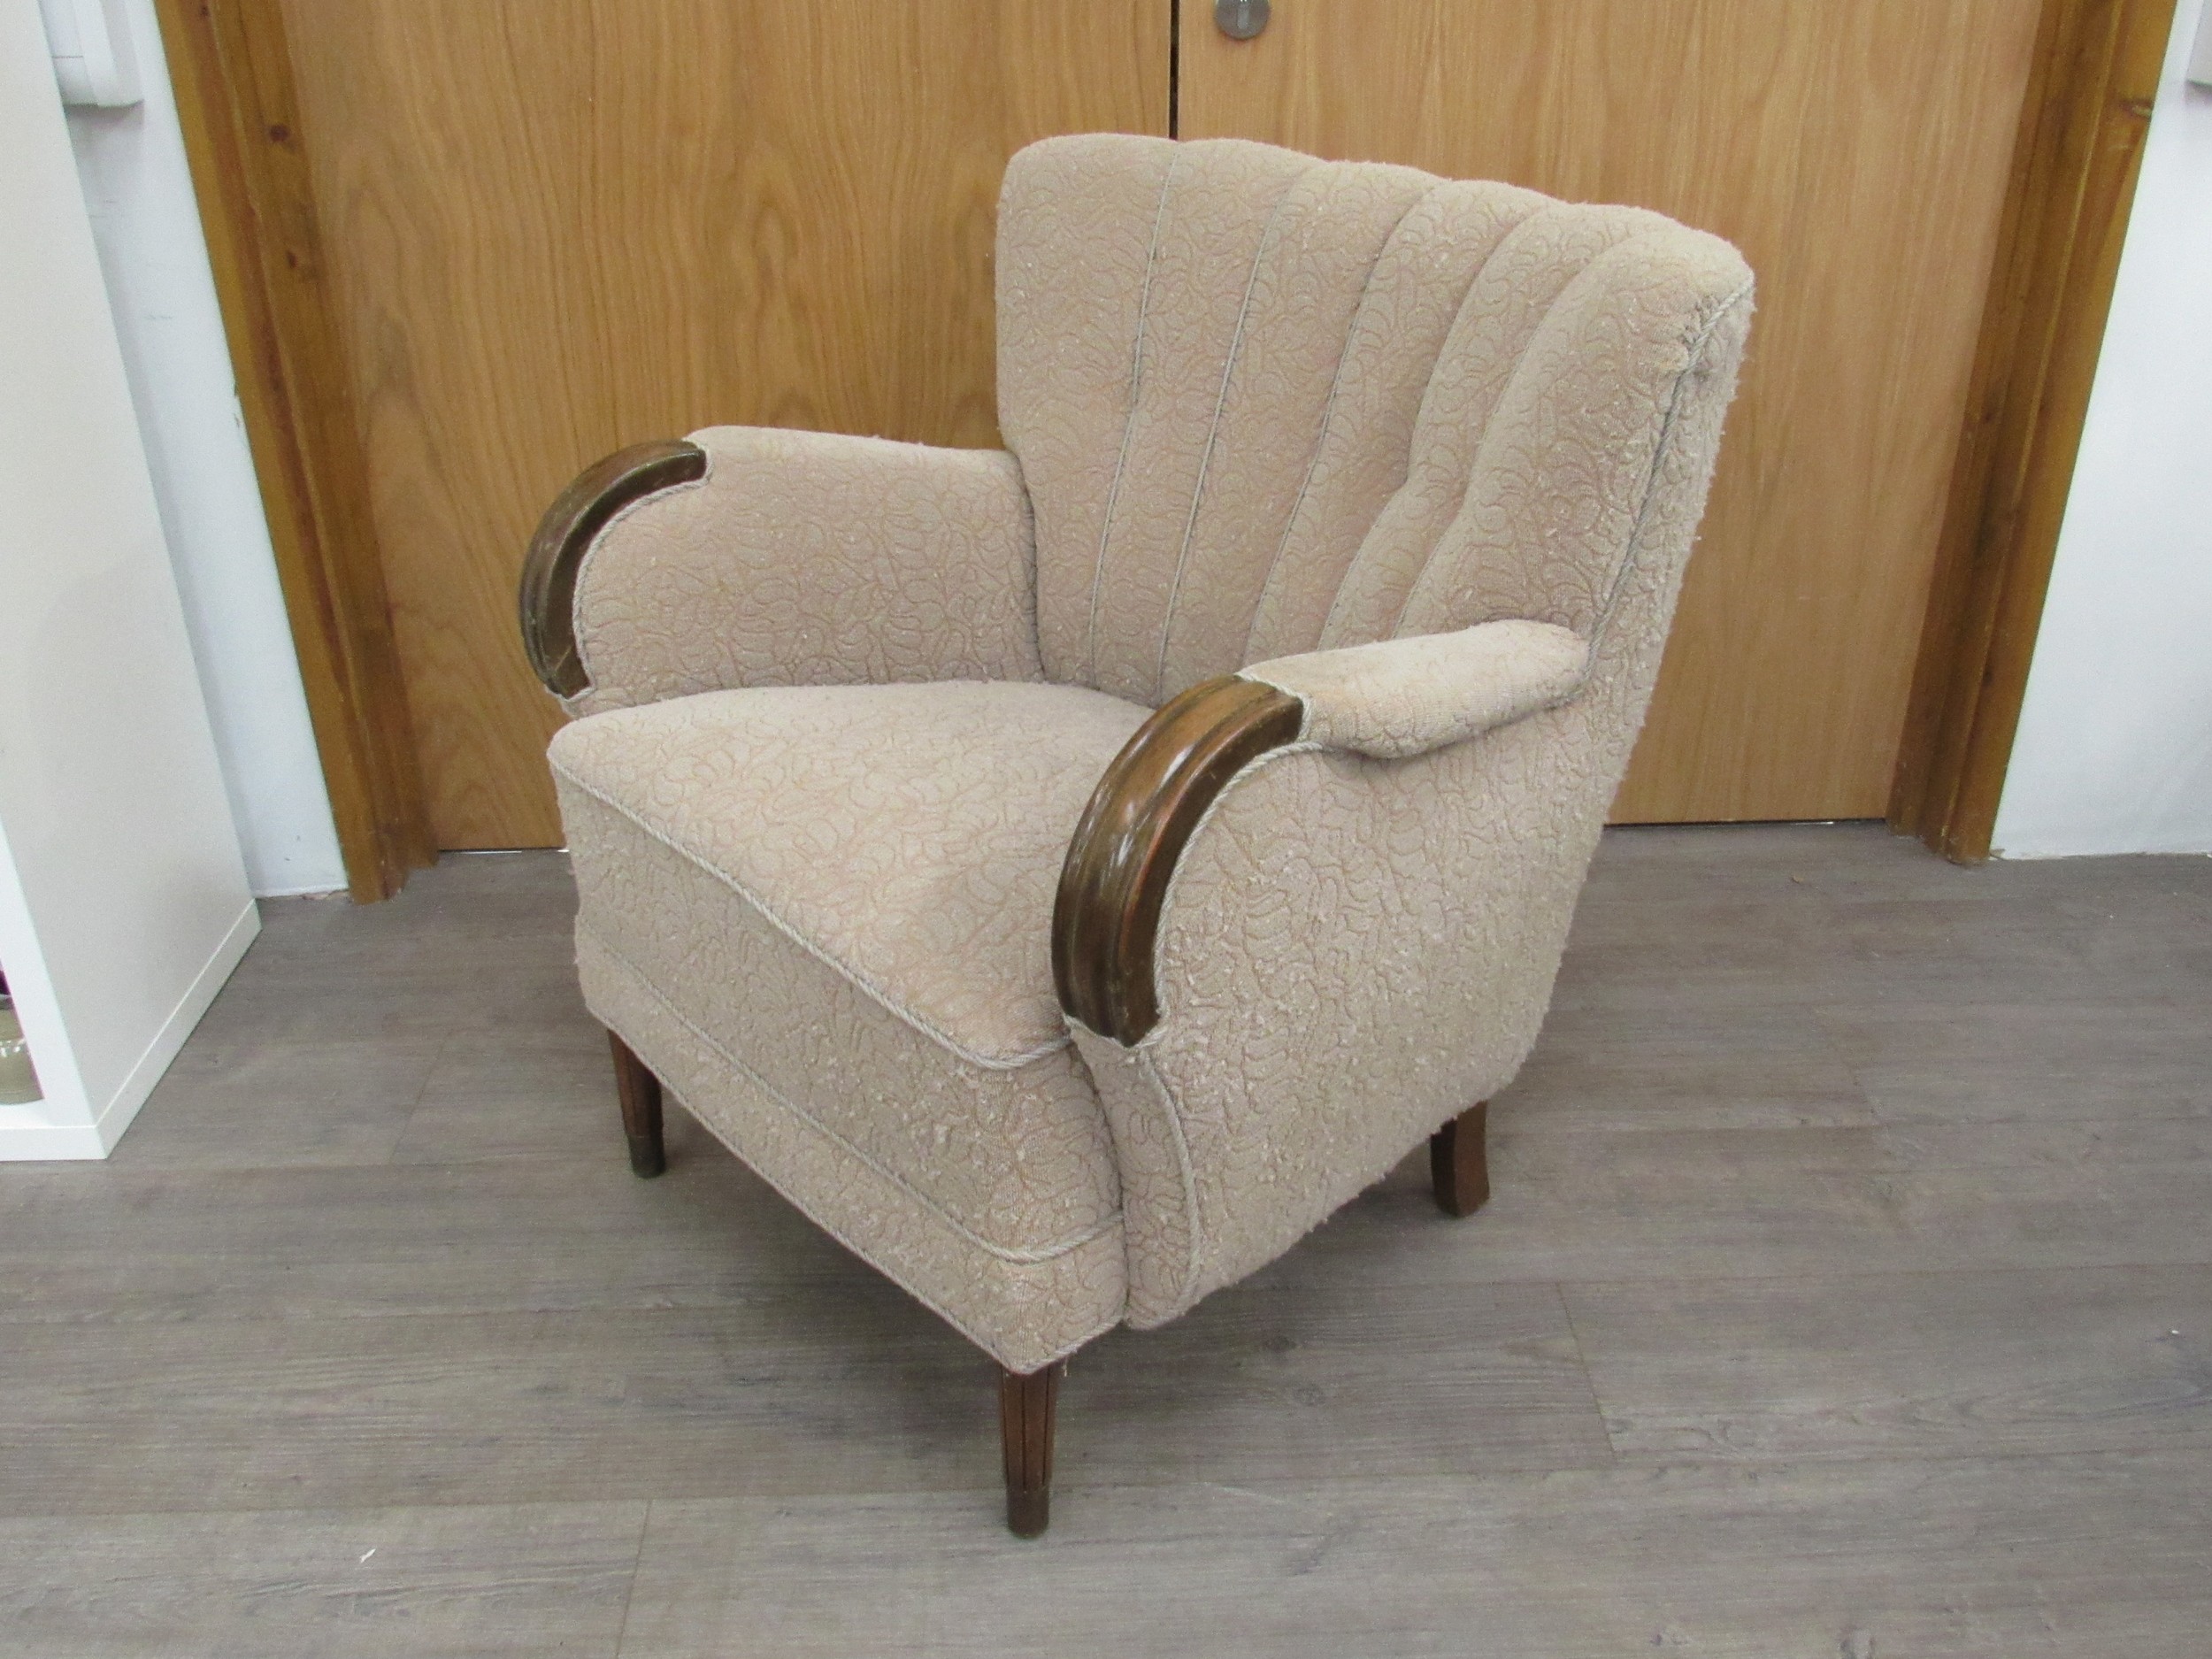 A 1940's Danish armchair original embossed upholstery in oatmeal colours, dark stained wooden arms